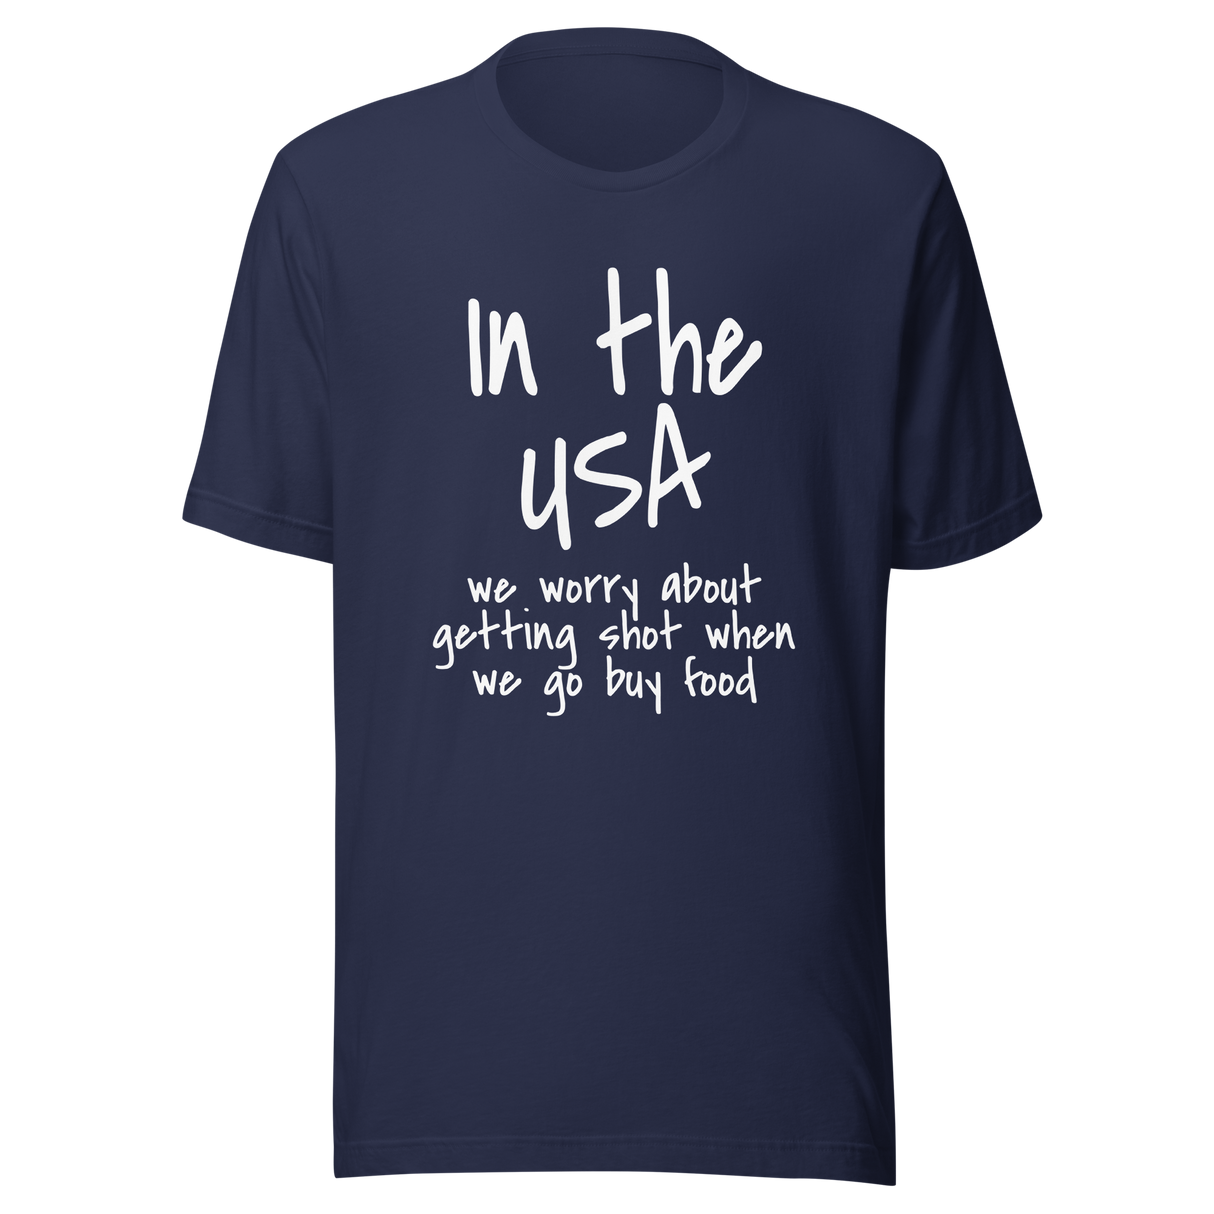 in-the-usa-we-think-about-getting-shot-when-we-go-buy-food-usa-tee-government-t-shirt-shot-tee-t-shirt-tee#color_navy